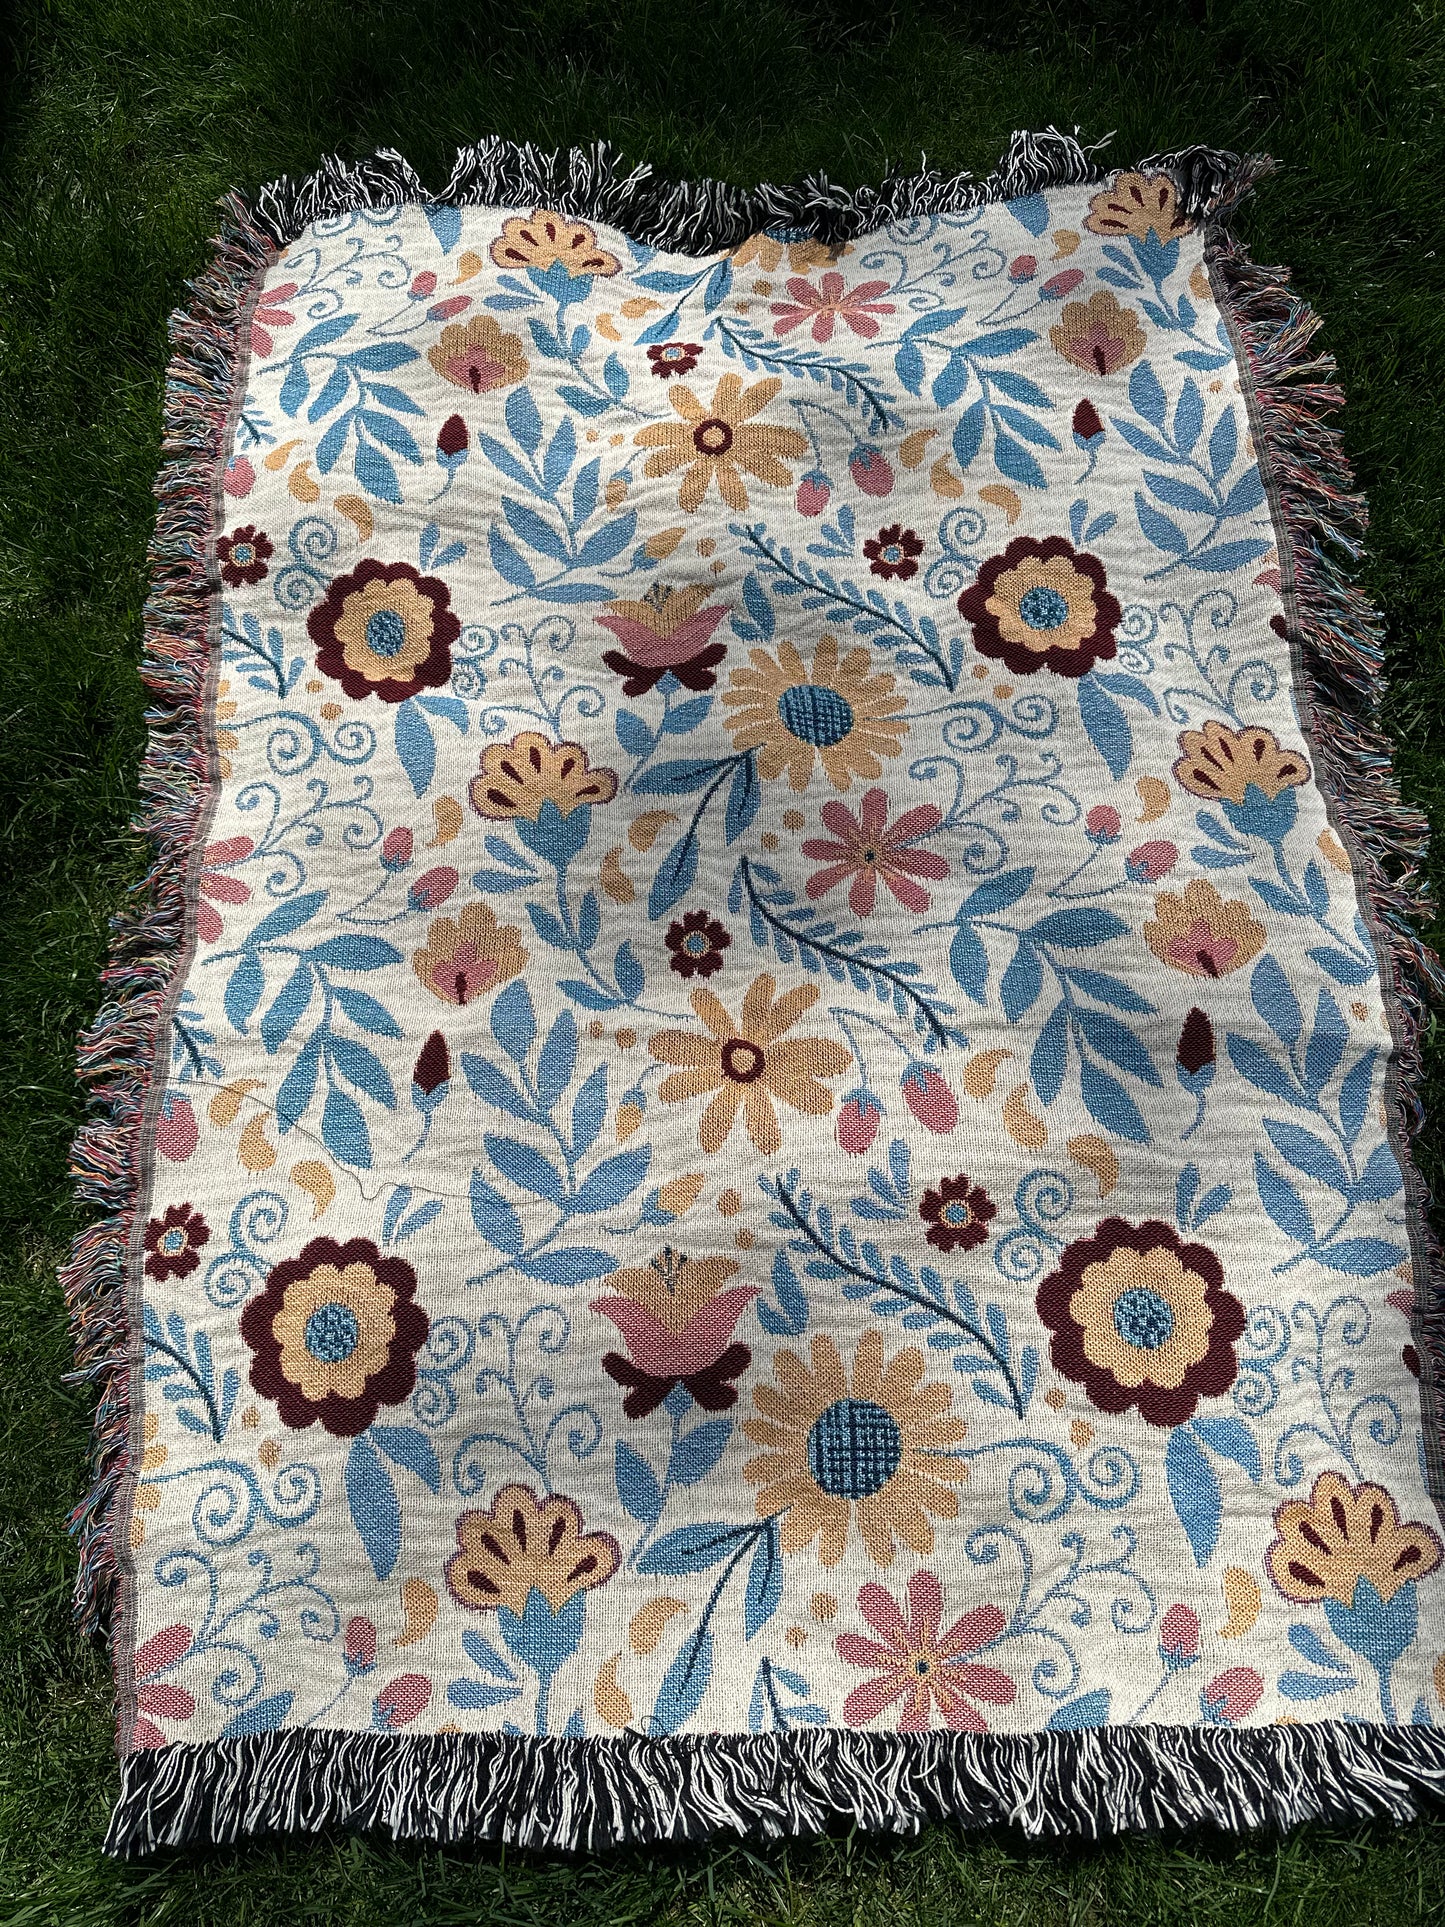 Flowers Woven Blankets. Colorful blanket for picnic or tapestry. Talavera Blanket. Mexican Flowers tapestry bla ket. Plant blanket for her.